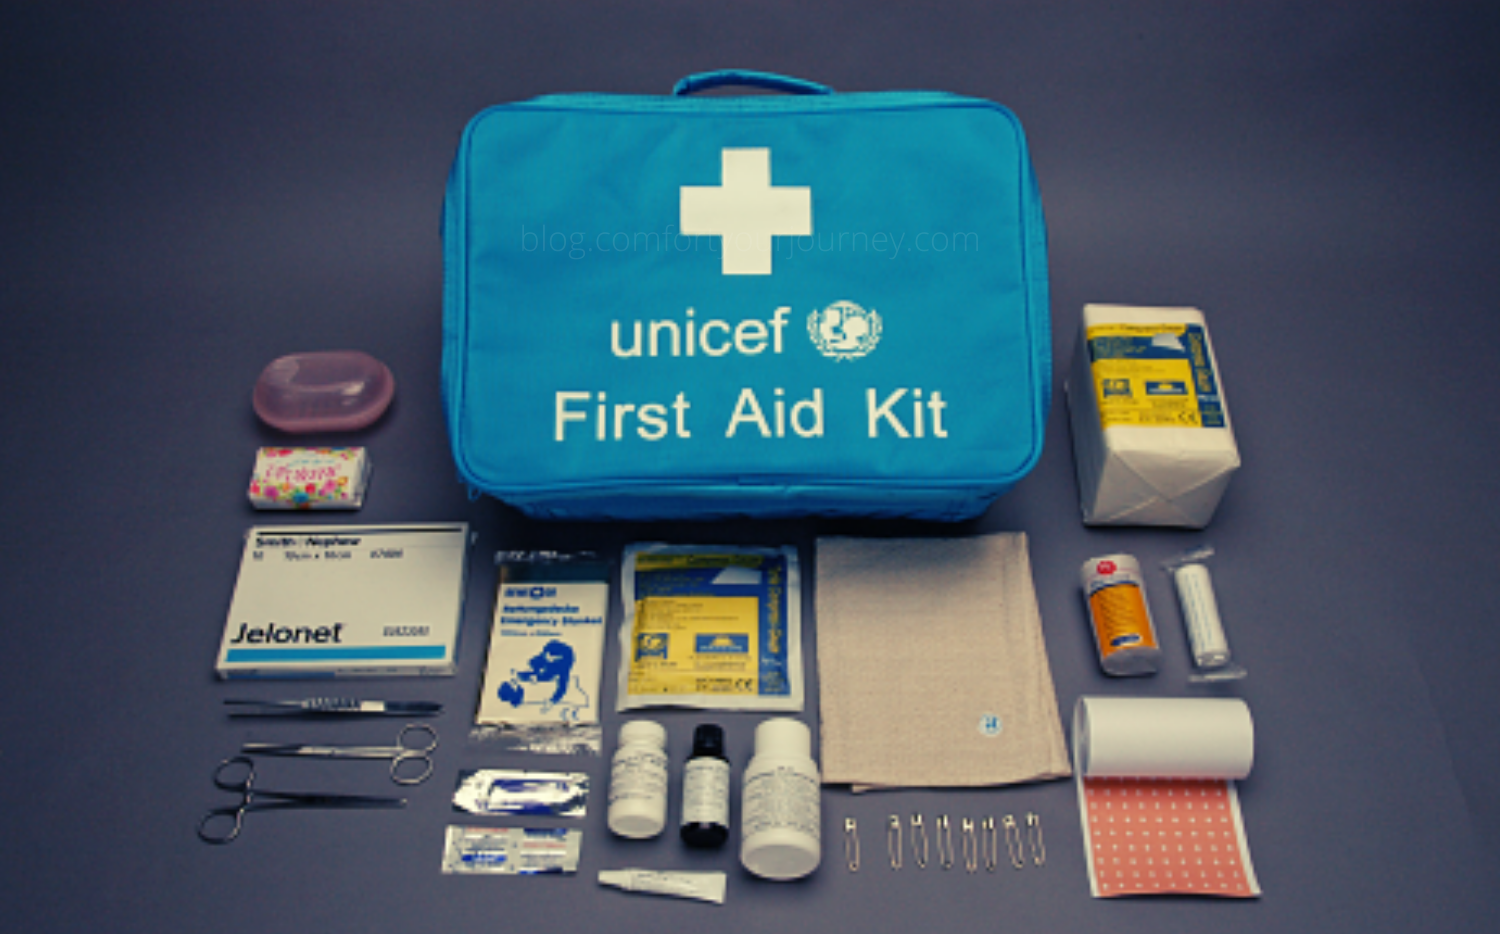 CARRY YOUR SANTIZATION AND FIRST AID KIT